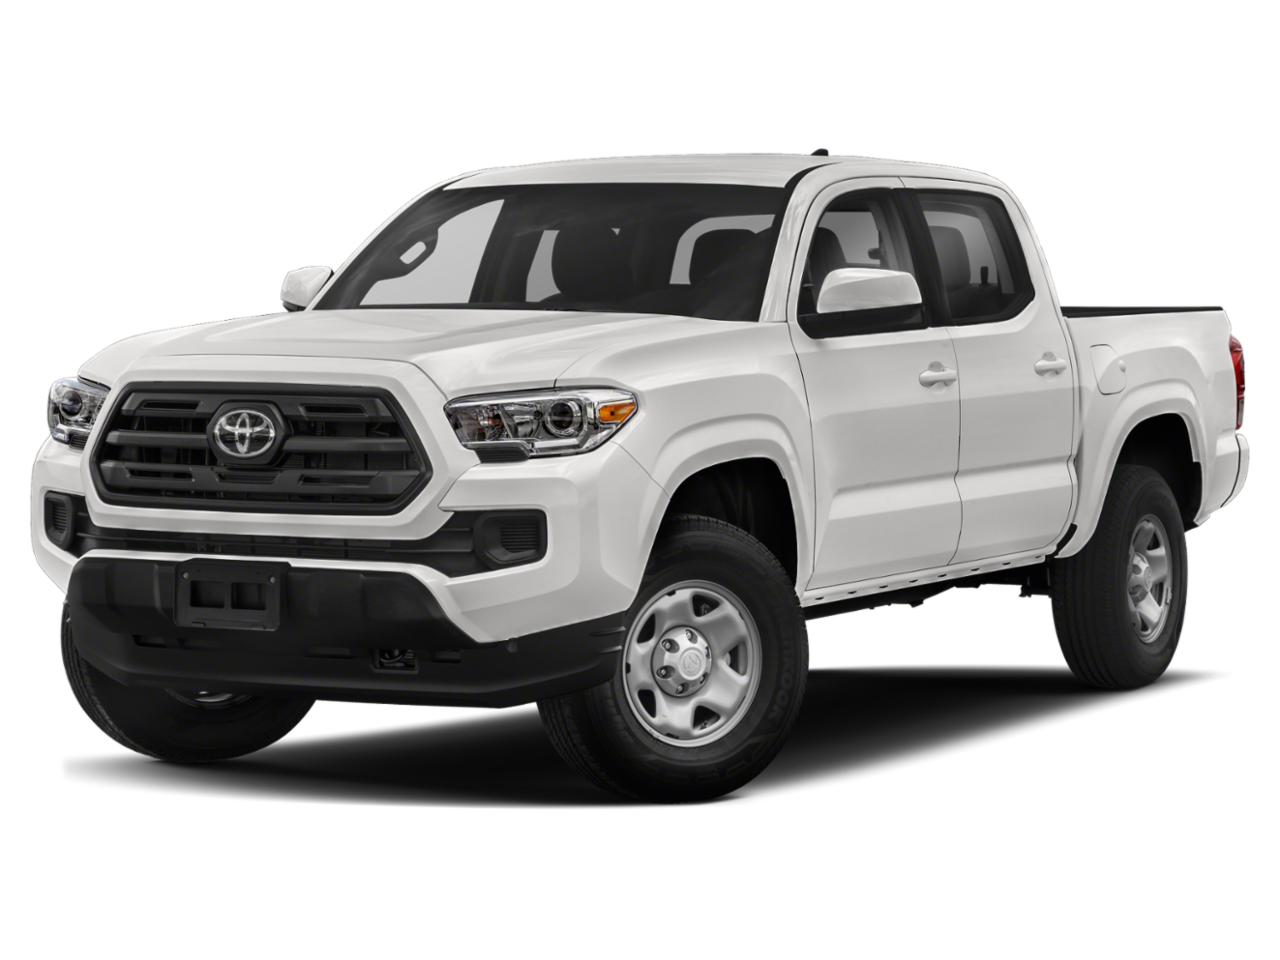 2019 Toyota Tacoma 4WD Vehicle Photo in MORGANTOWN, WV 26501-2421